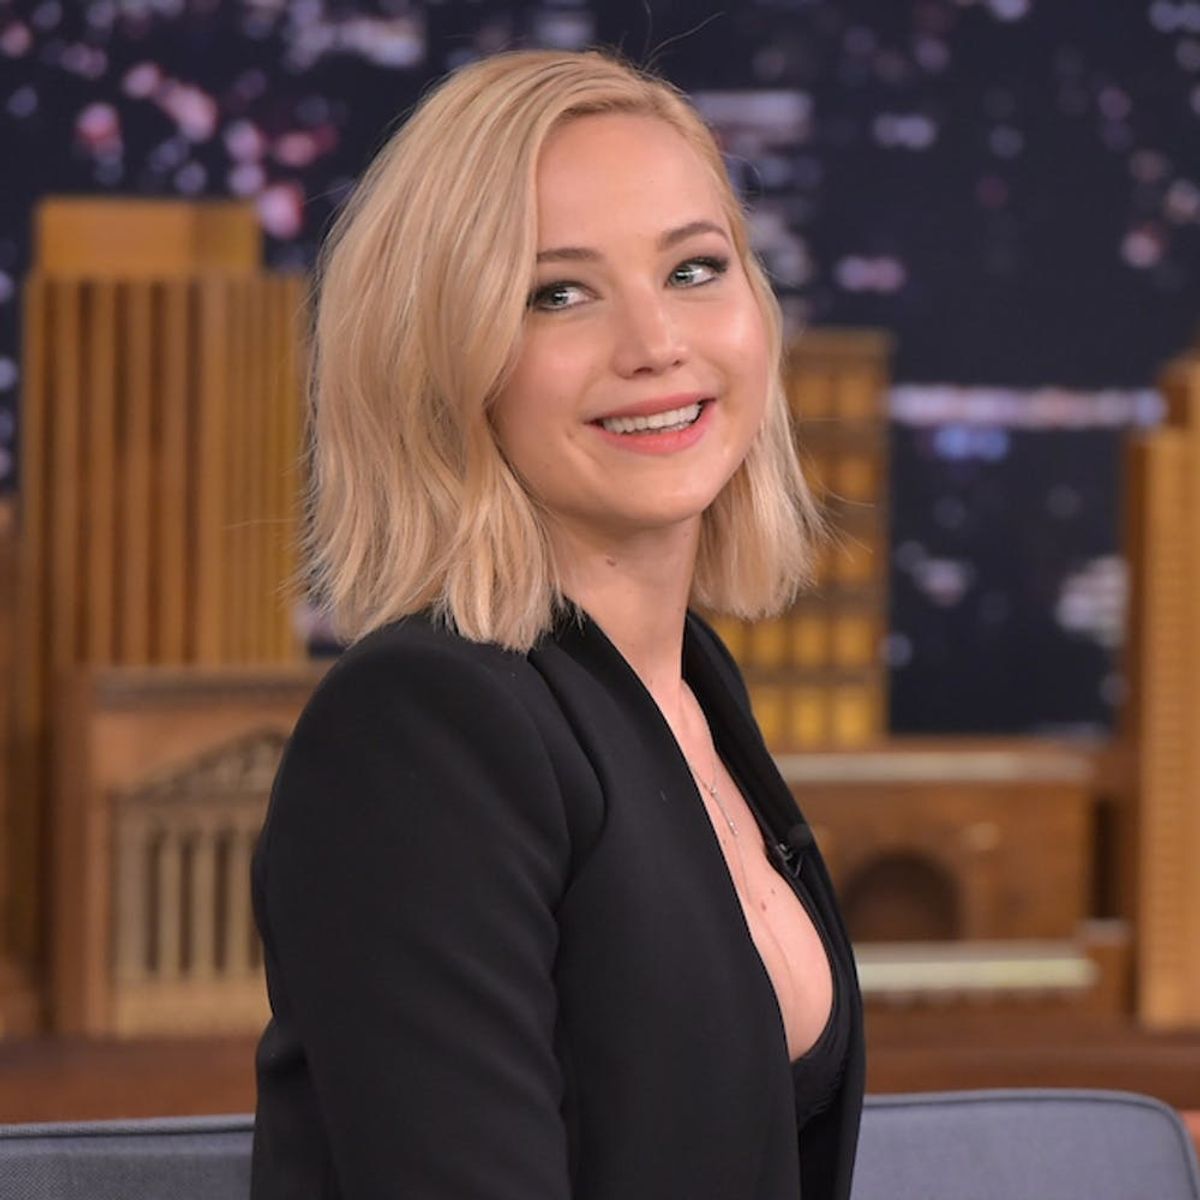 Jennifer Lawrence’s Most Embarrassing Wardrobe Malfunction Has Happened to Us ALL